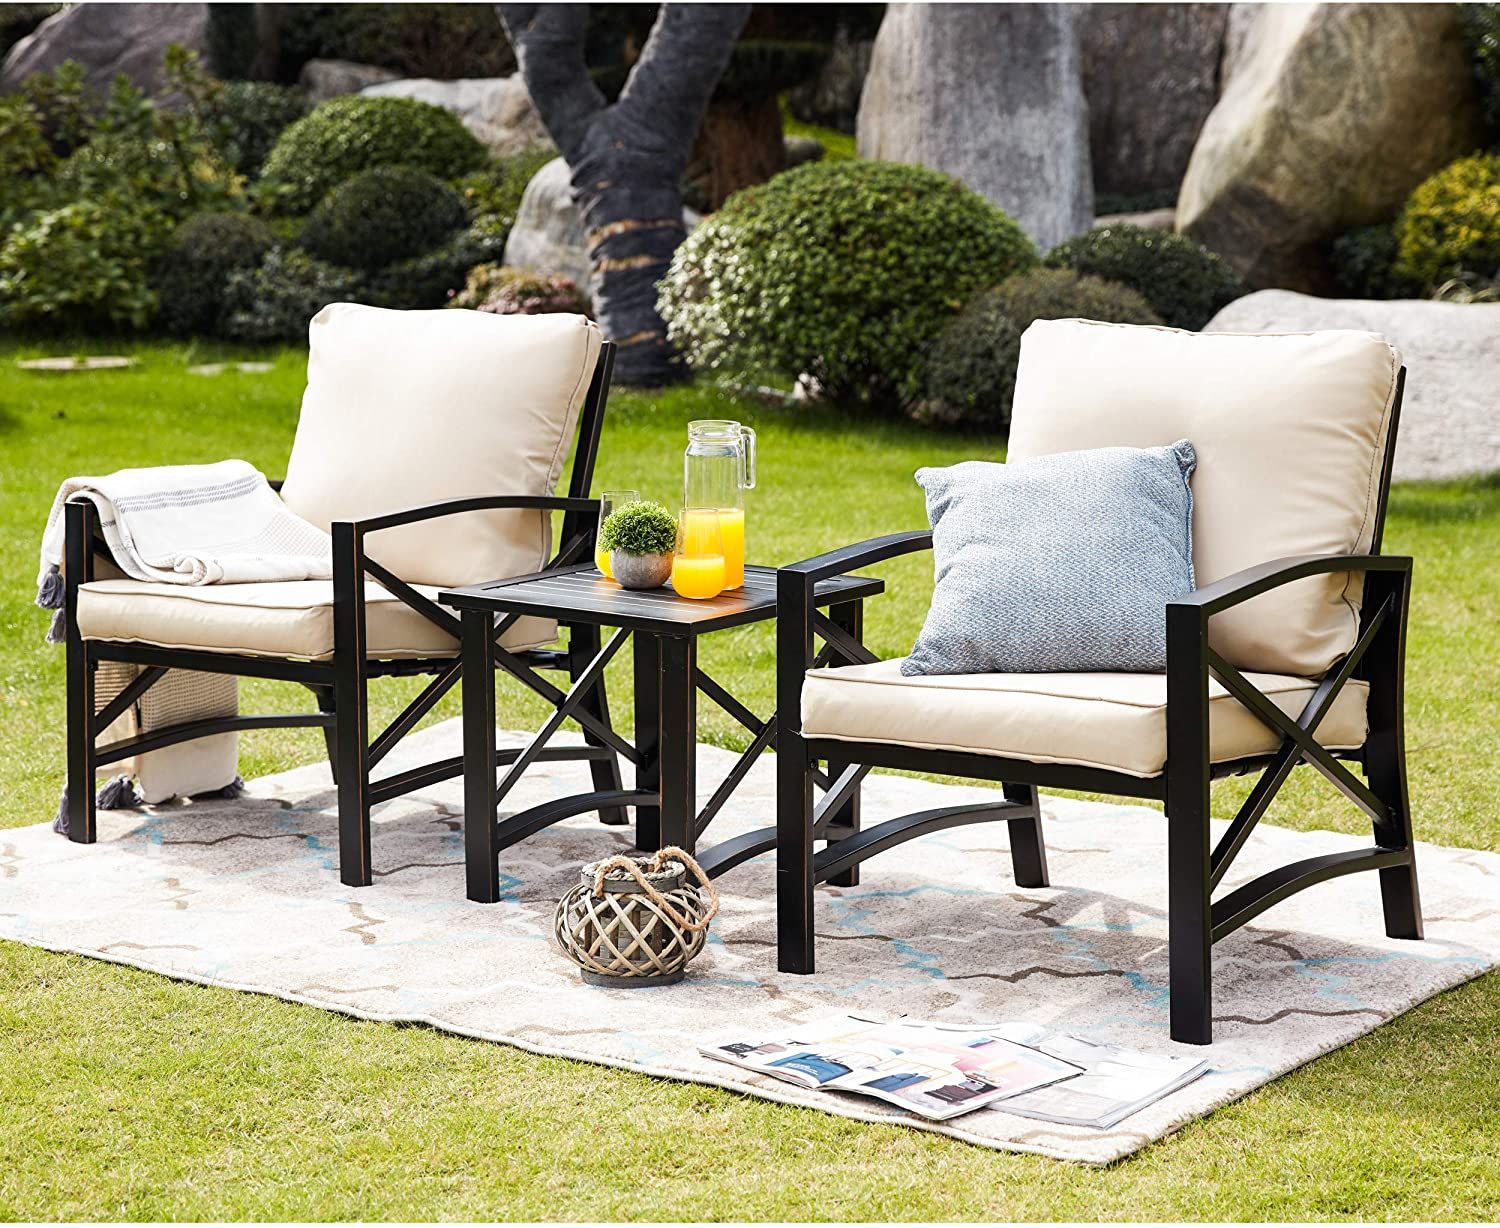 8 Best Patio Furniture Sets 2021 The, Piece Resin Wicker Patio Dining Sets